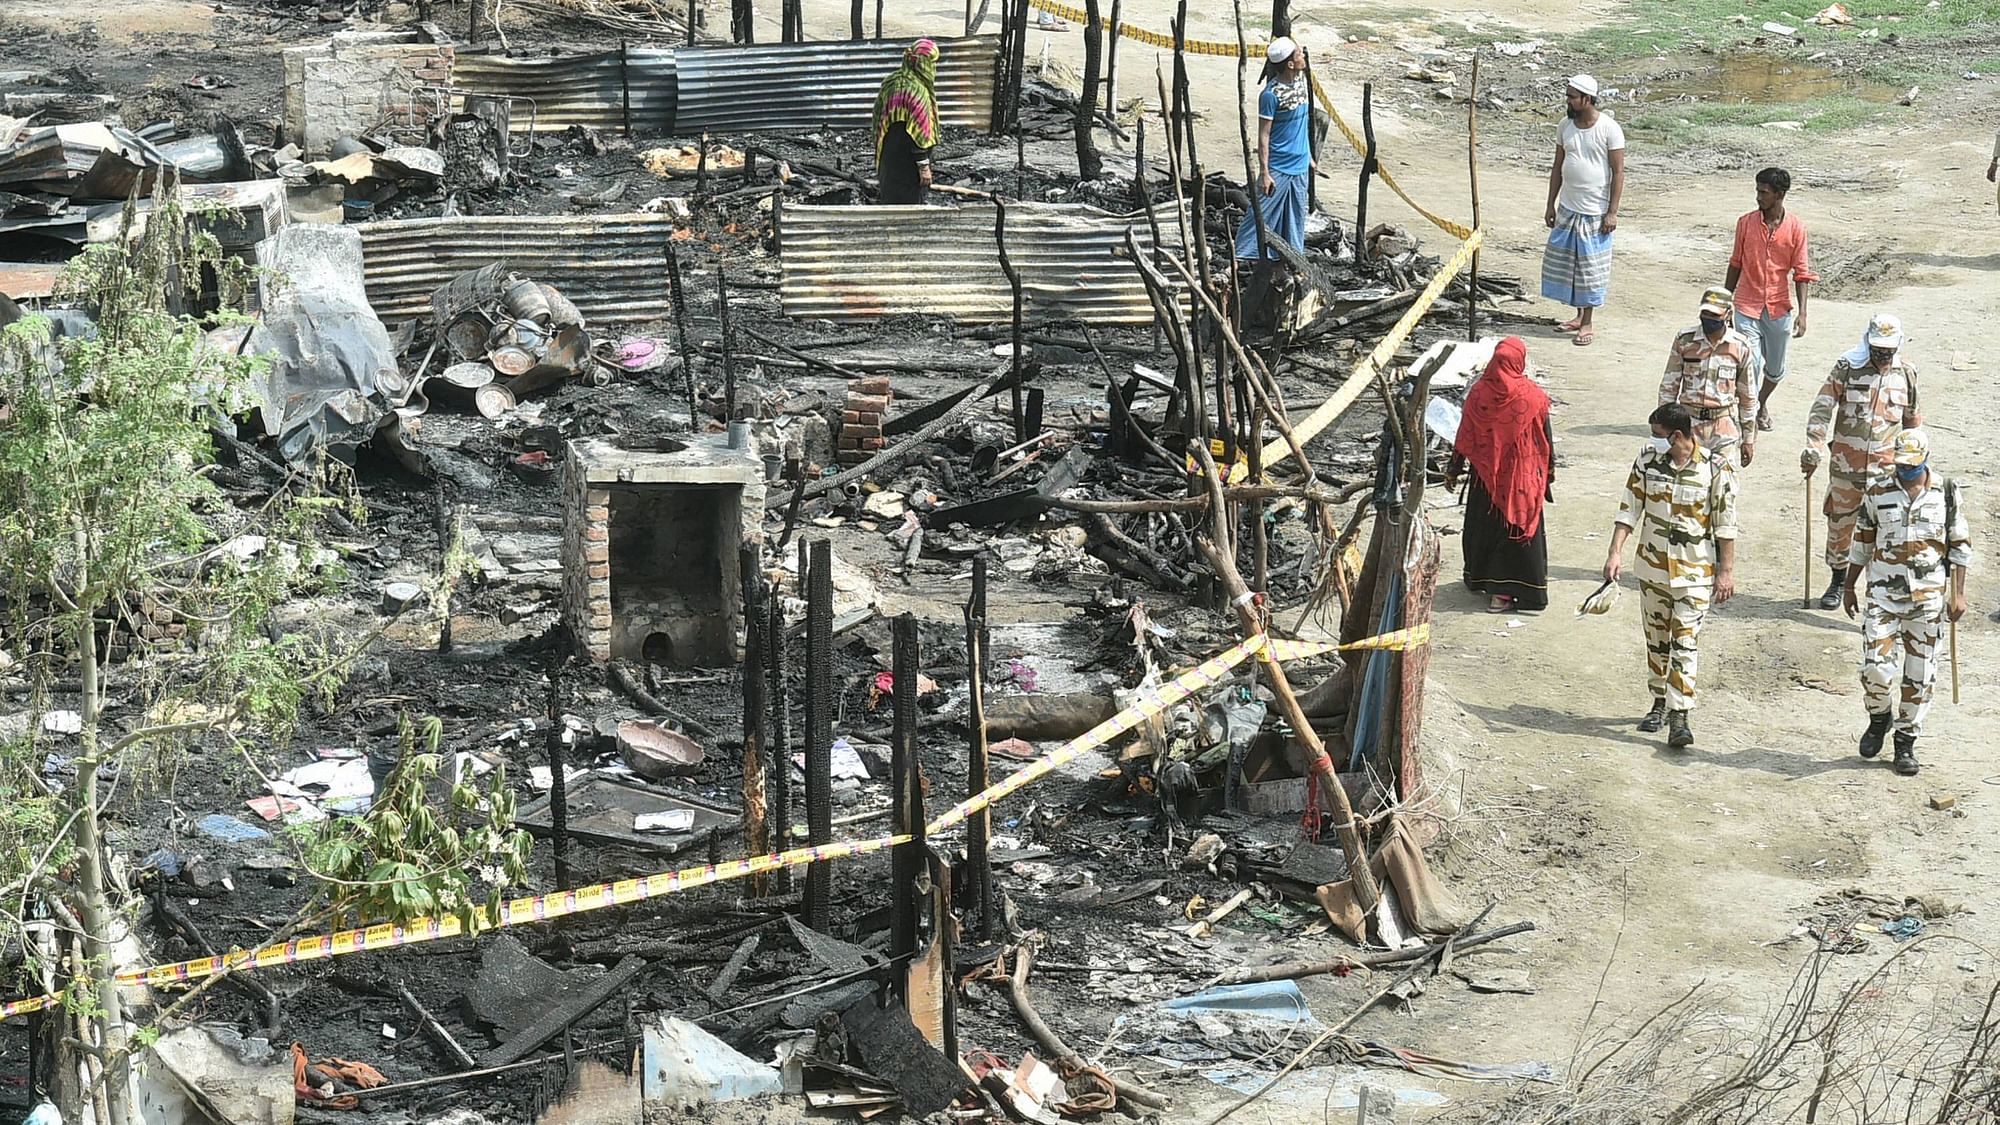 A massive fire broke out at the Rohingya refugee camp in the Madanpur Khadar area on 13 June.